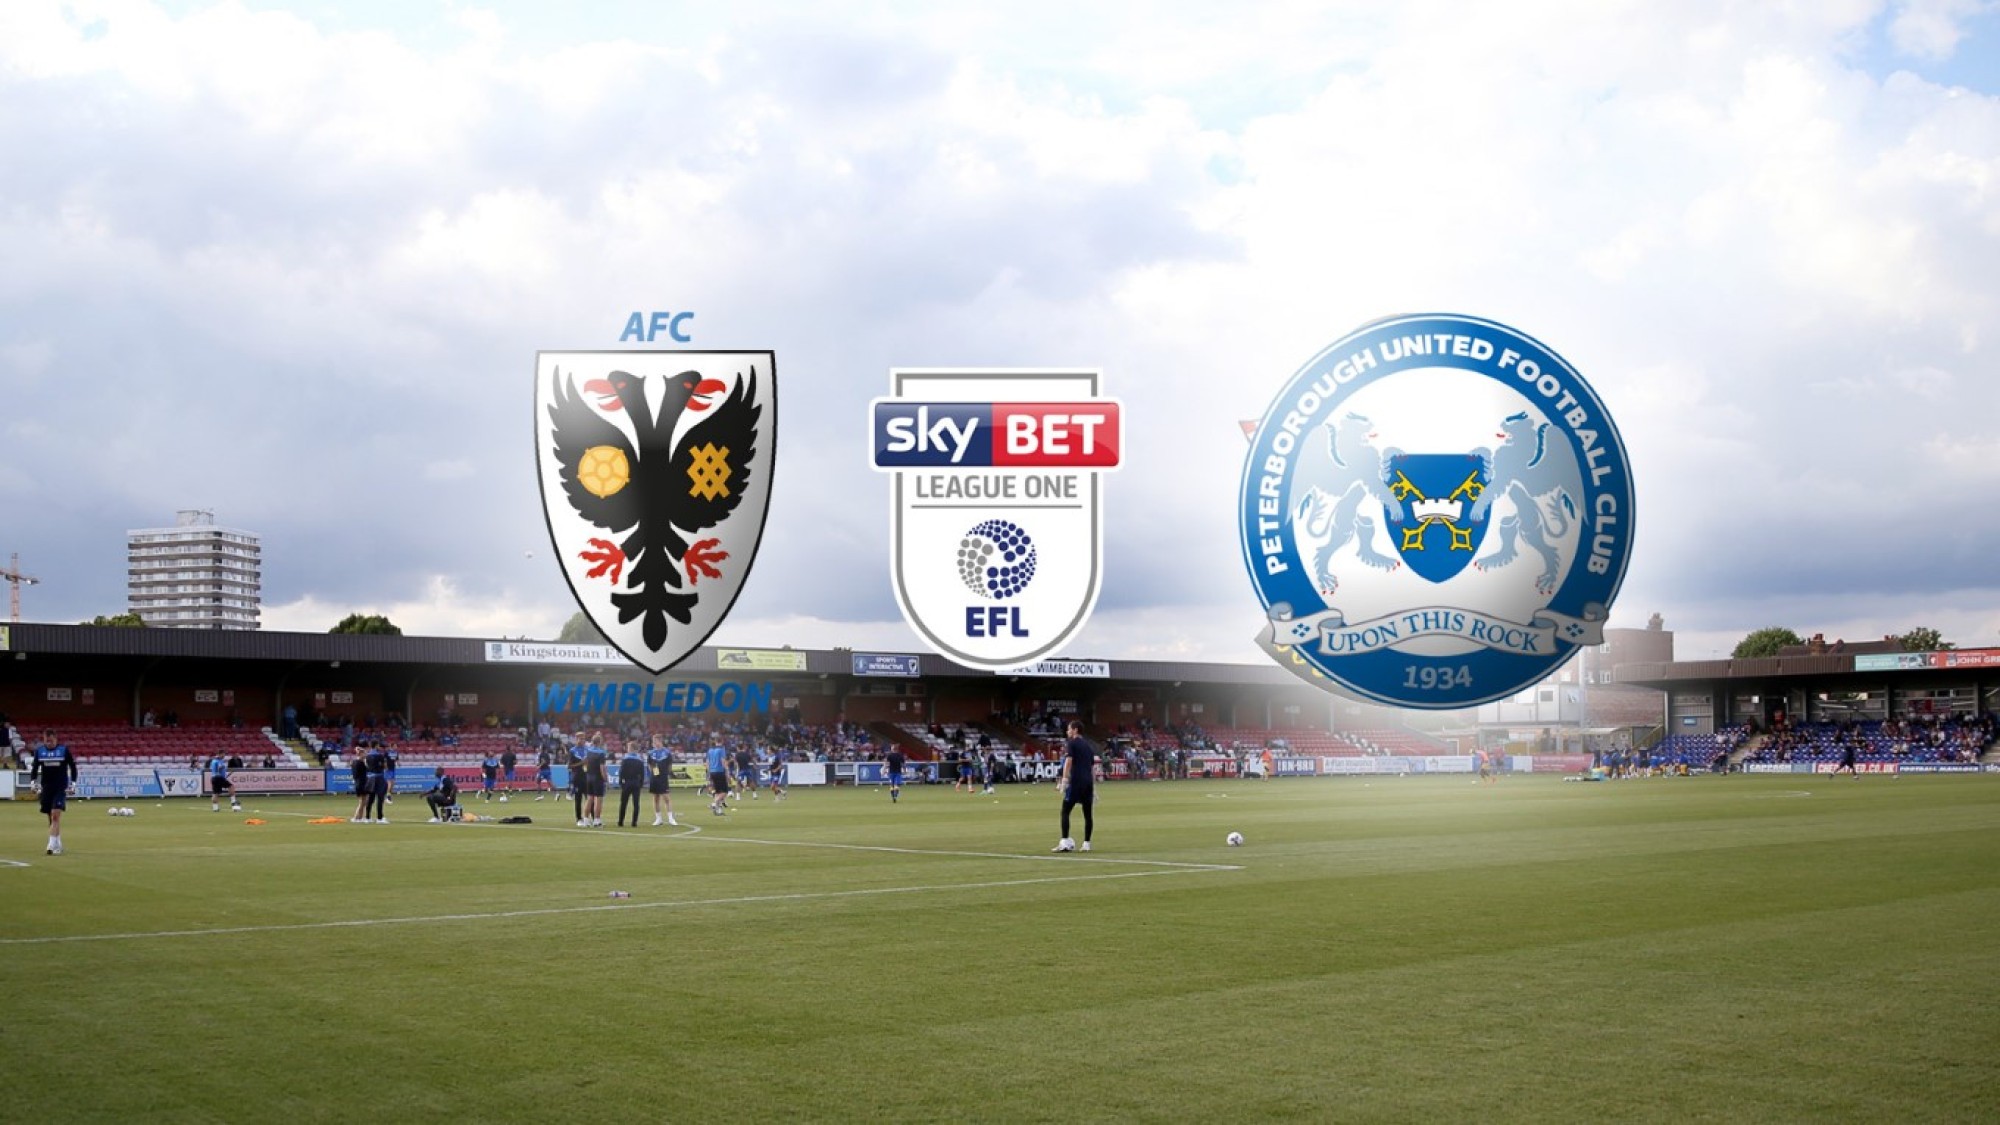 AFC Wimbledon Fixture Moved | Peterborough United - The Posh